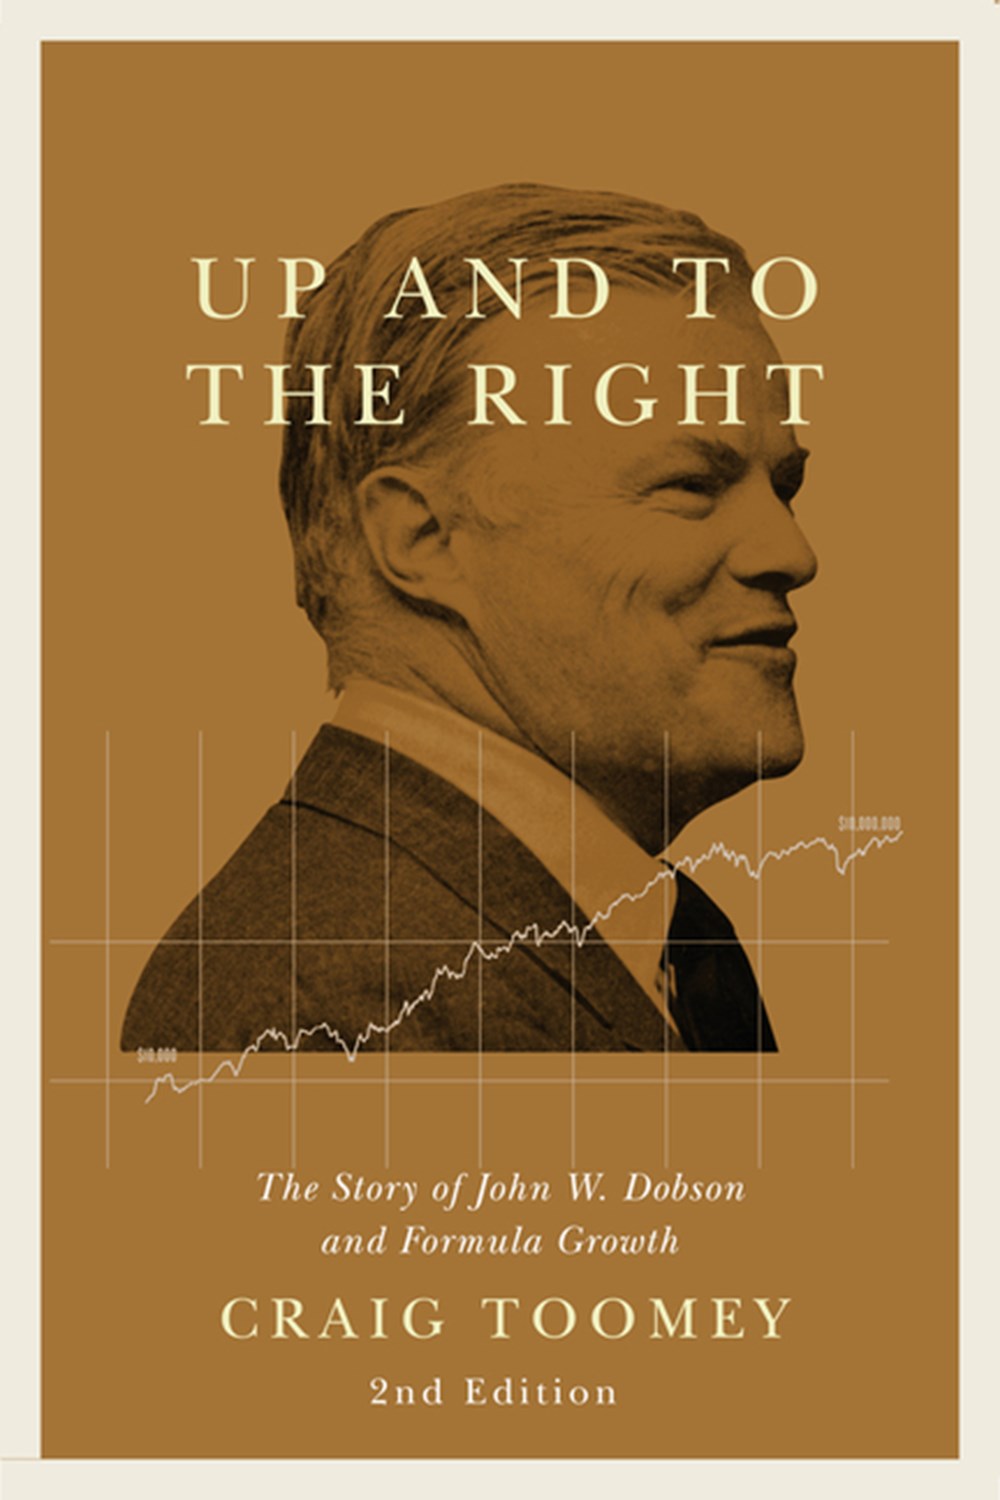 Up and to the Right The Story of John W. Dobson and Formula Growth, Second Edition